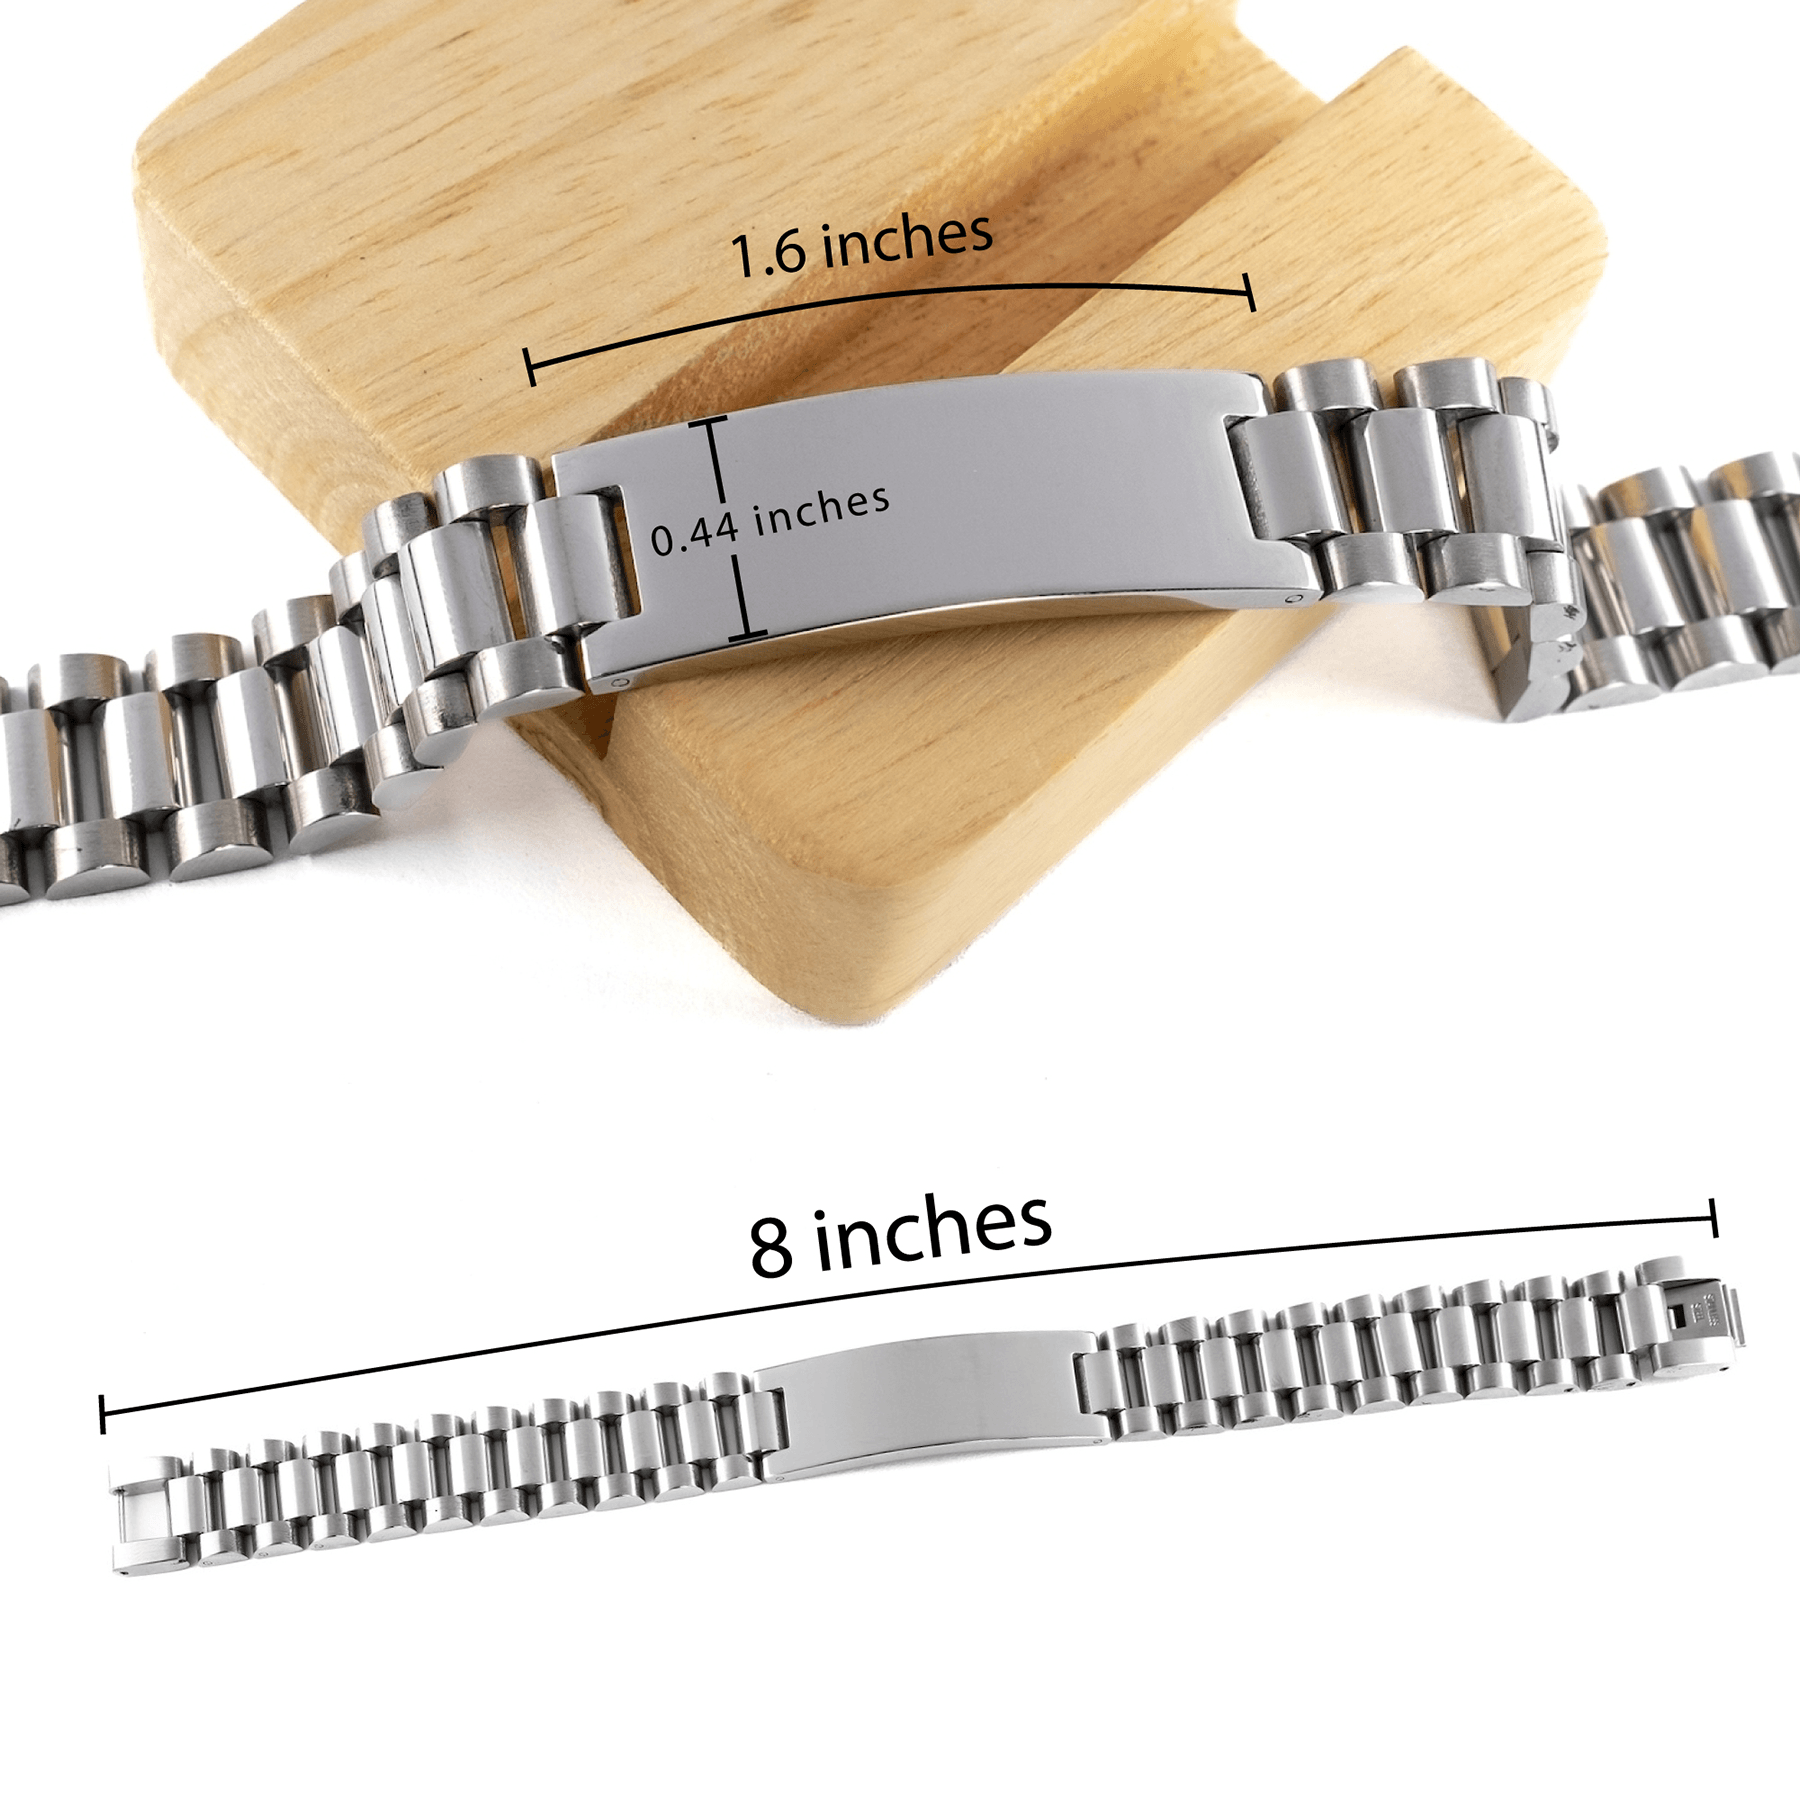 Dealer Ladder Stainless Steel Engraved Bracelet - Thanks for being who you are - Birthday Christmas Jewelry Gifts Coworkers Colleague Boss - Mallard Moon Gift Shop